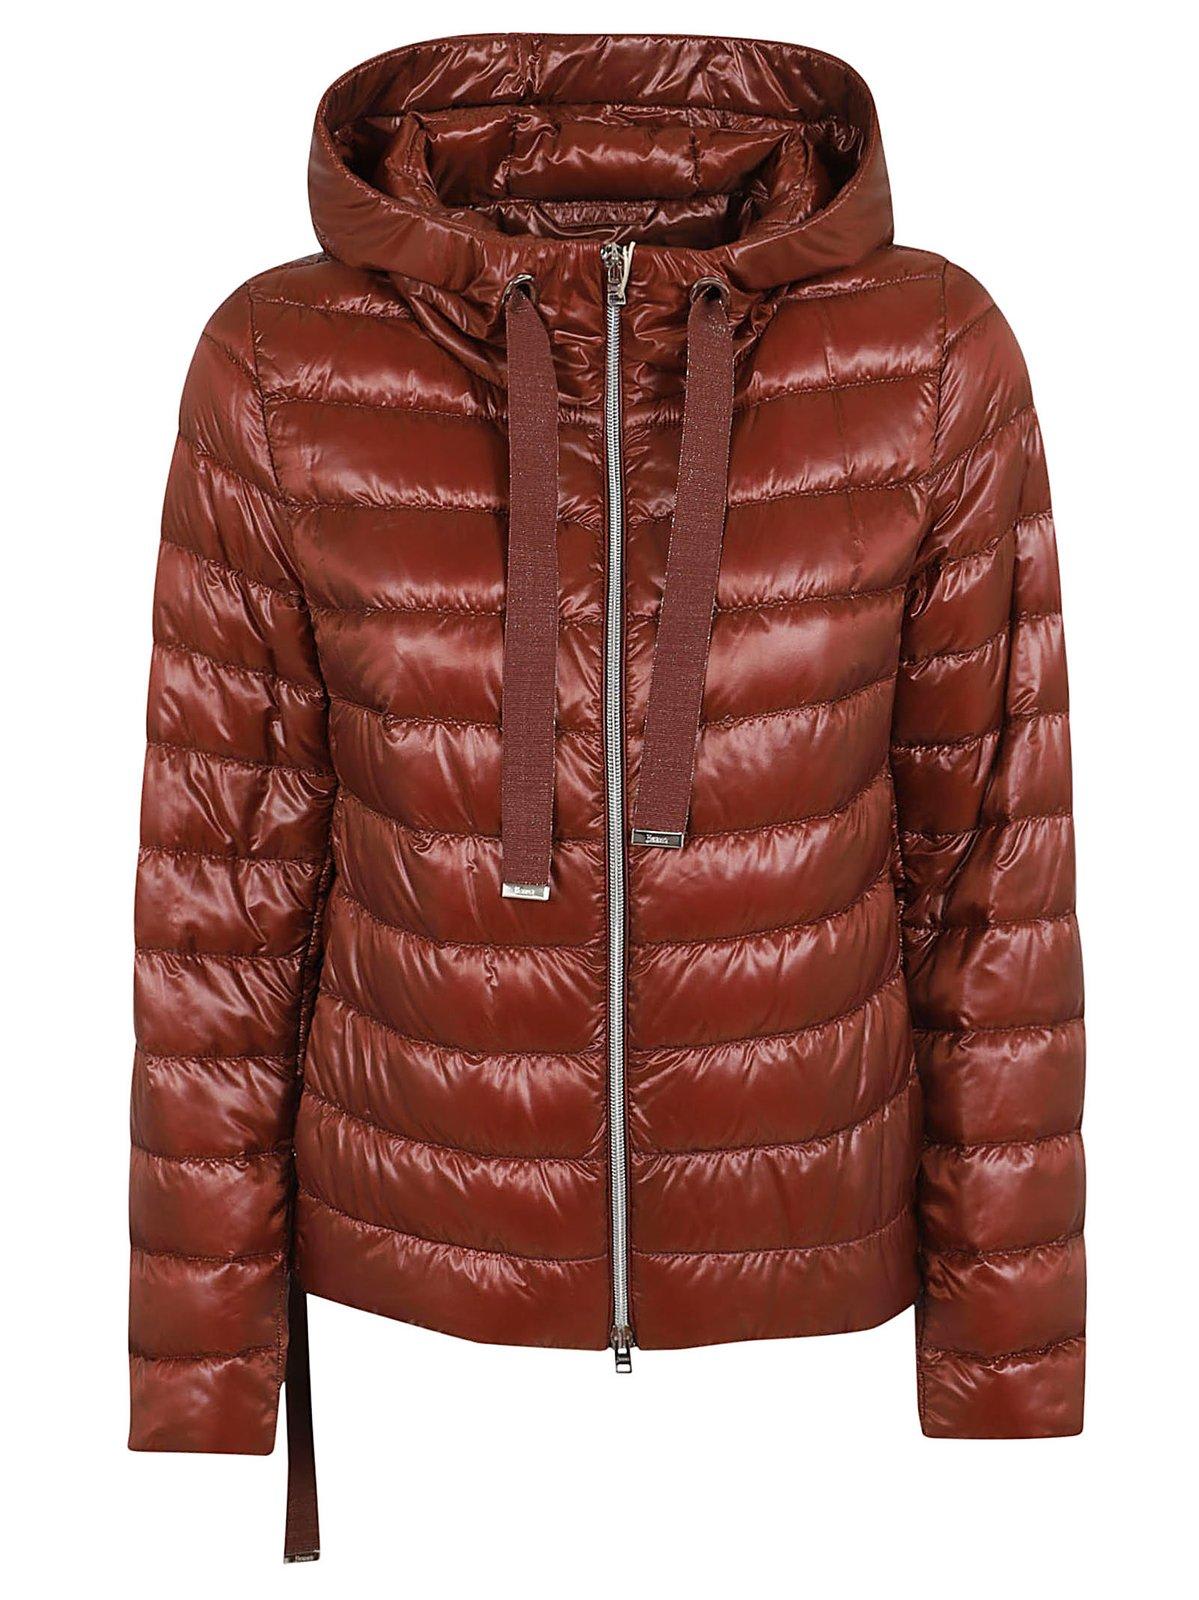 HERNO QUILTED HOODED COAT